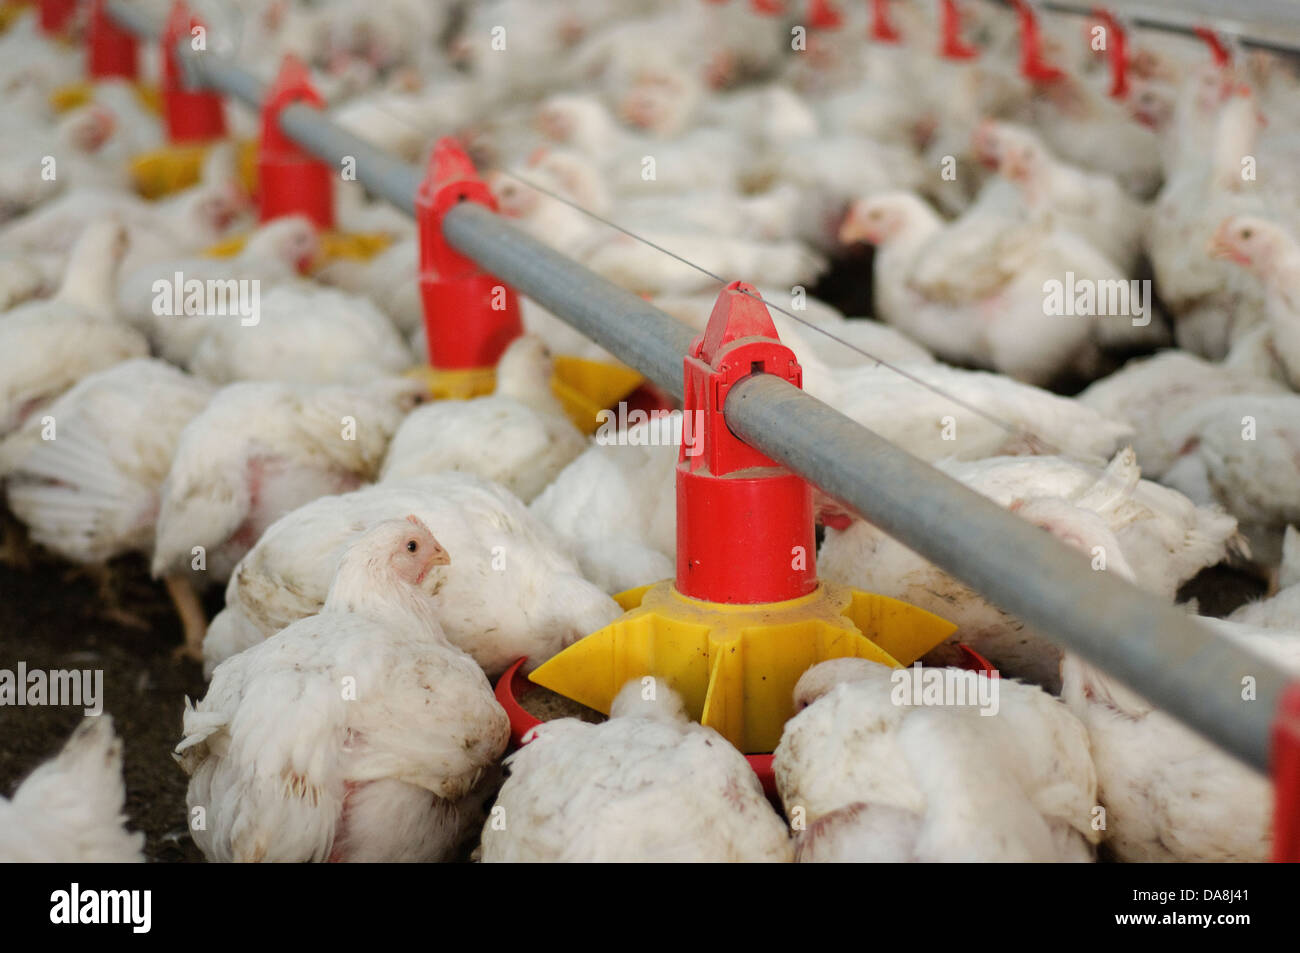 Poultry Farming. Chicks in a coop five days before slaughter Photographed in Israel Stock Photo